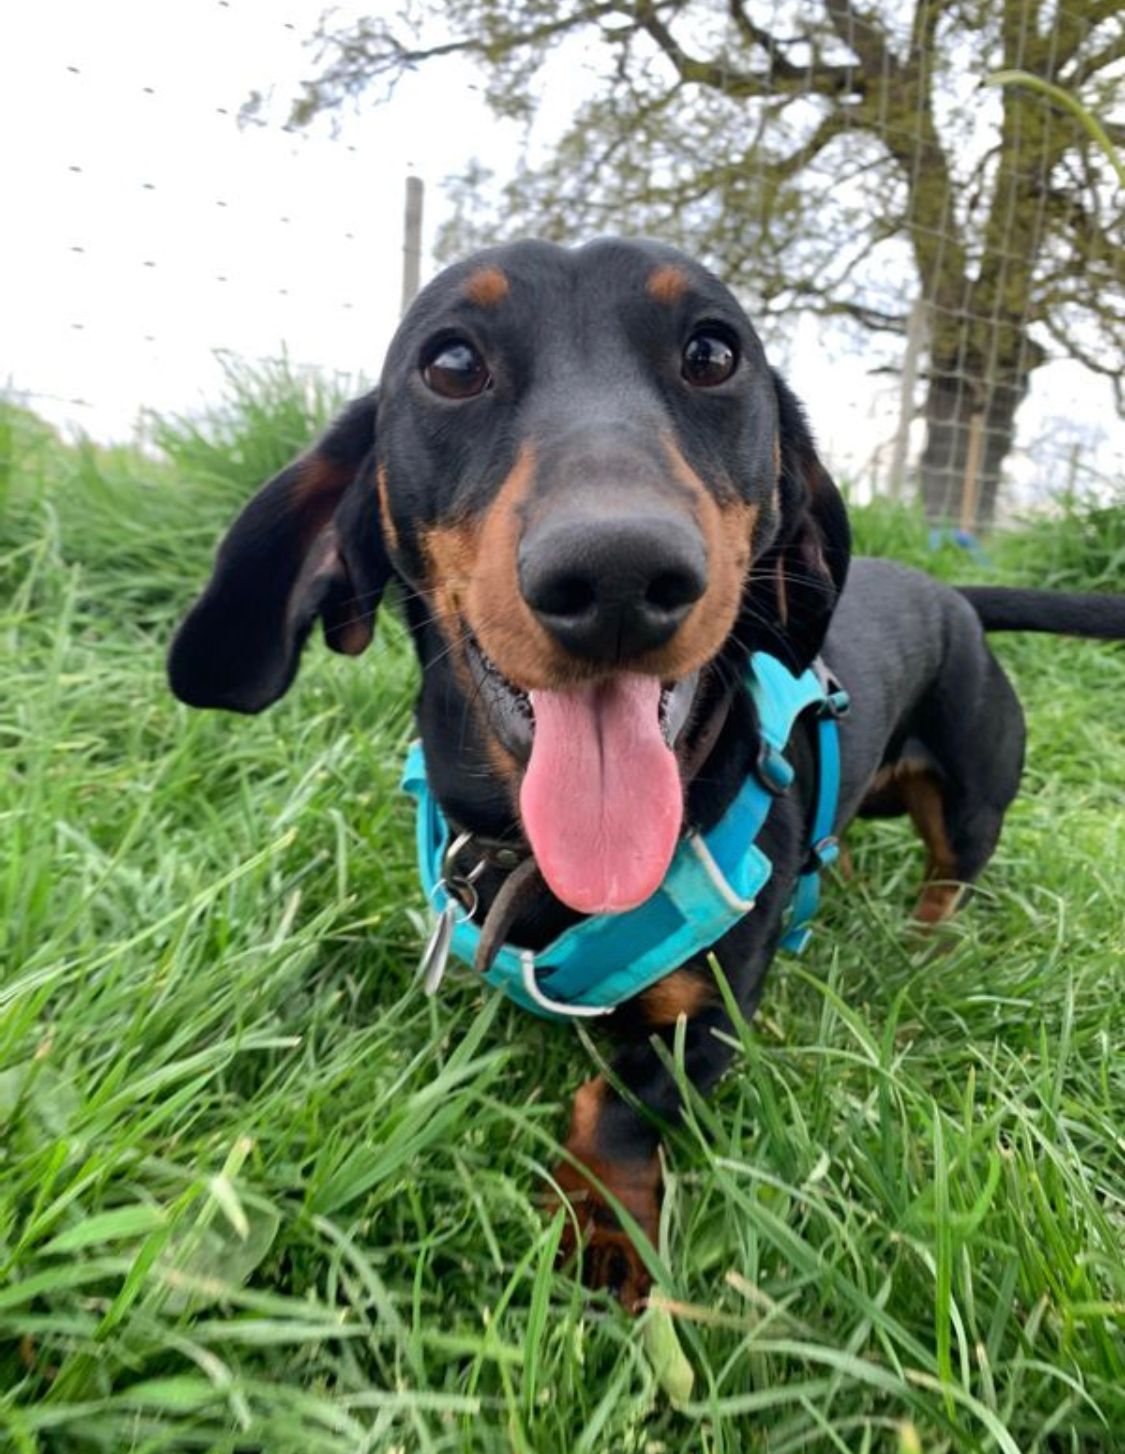 Stevie the Miniature Dachshund stood on a field with floppy ears and a lolling tongue.